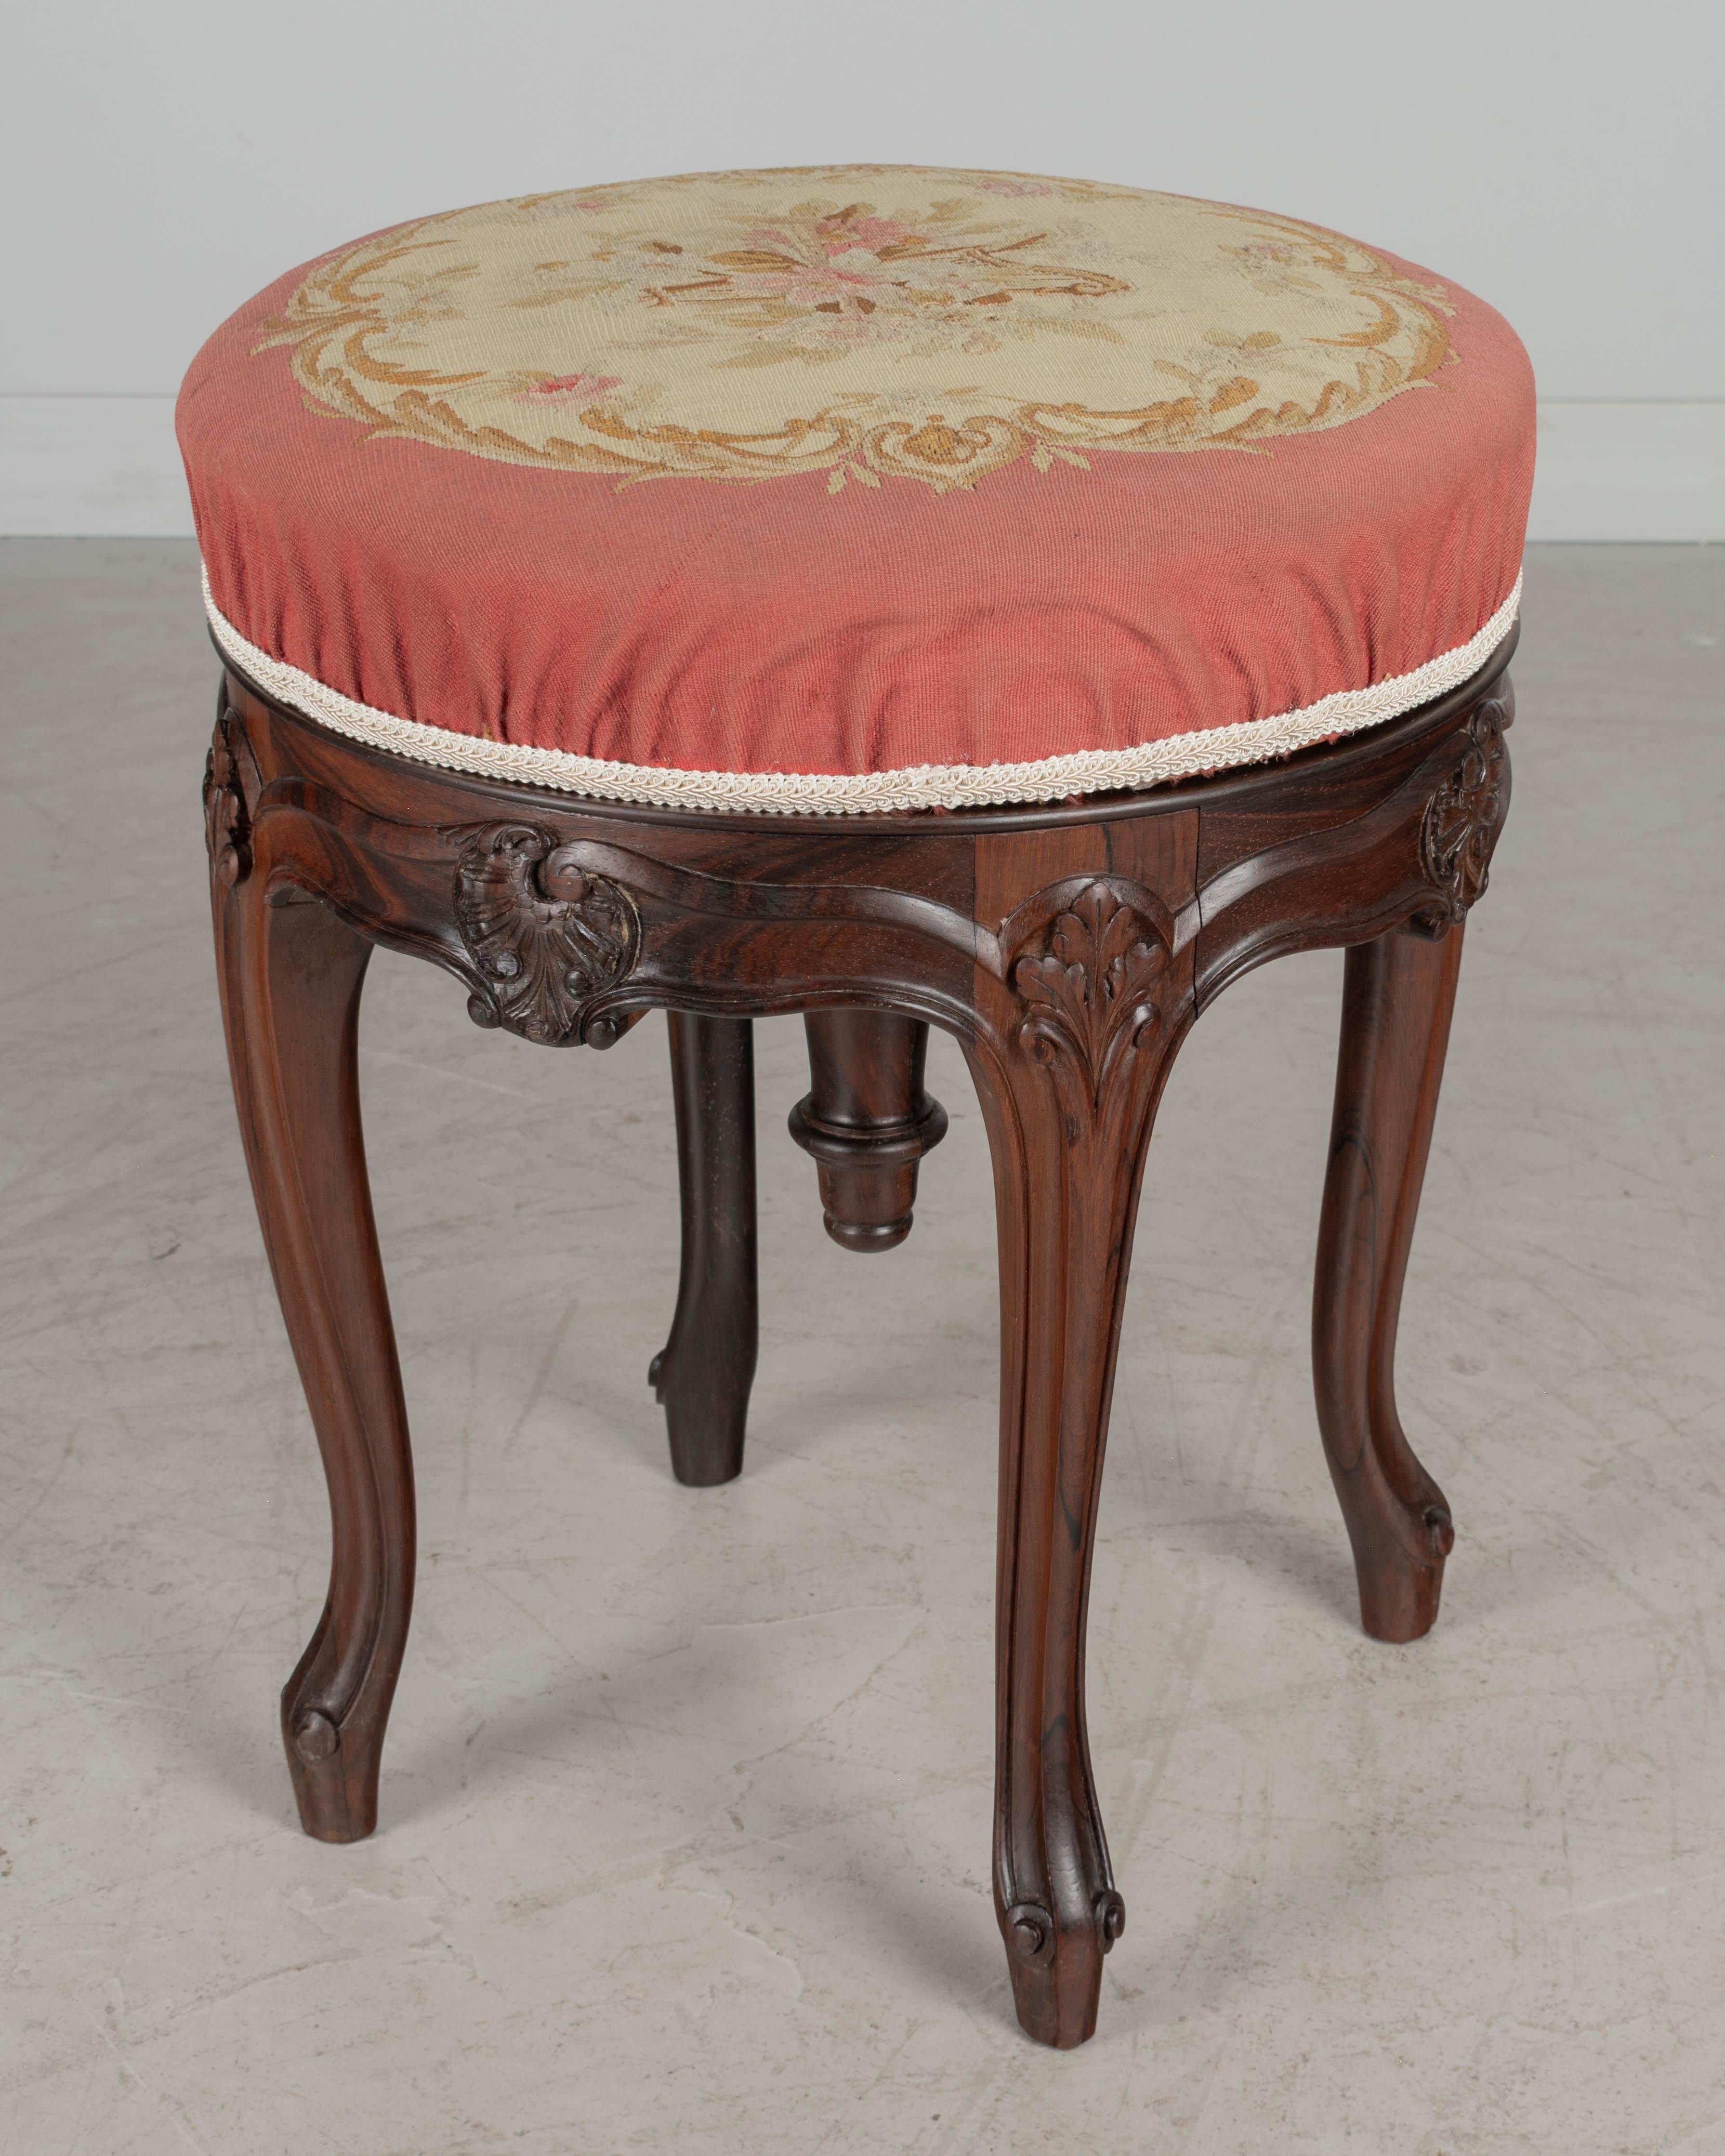 A 19th century French Louis XV style adjustable swivel stool made of solid rosewood with hand-carved details, sturdy curved legs and decorative wood finial.  Covered in original petit point tapestry fabric, depicting a harp with pink flowers. The